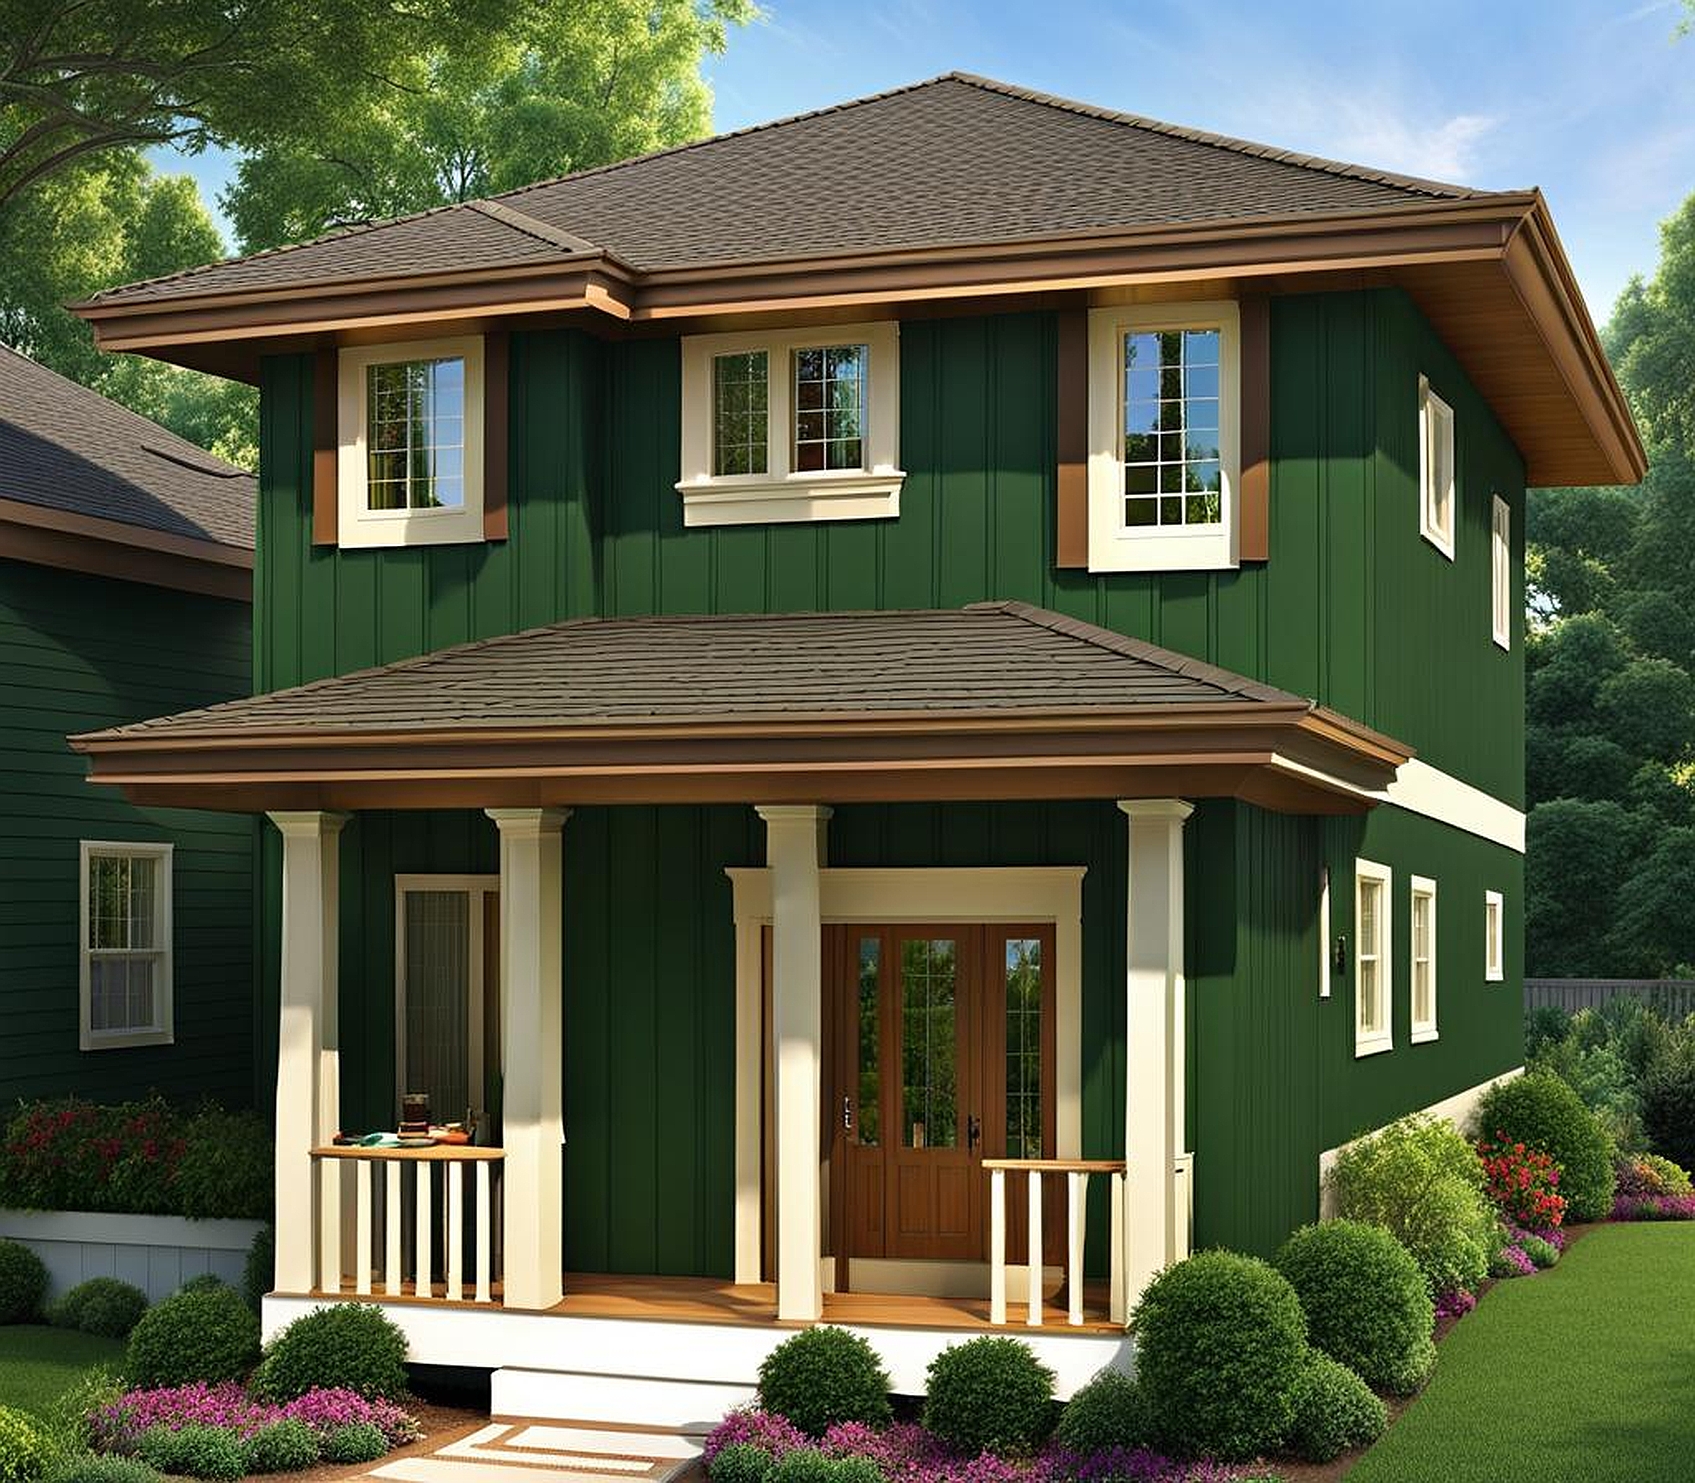 Dark Green Exterior Paint Color Schemes with Vertical or Horizontal Stripes